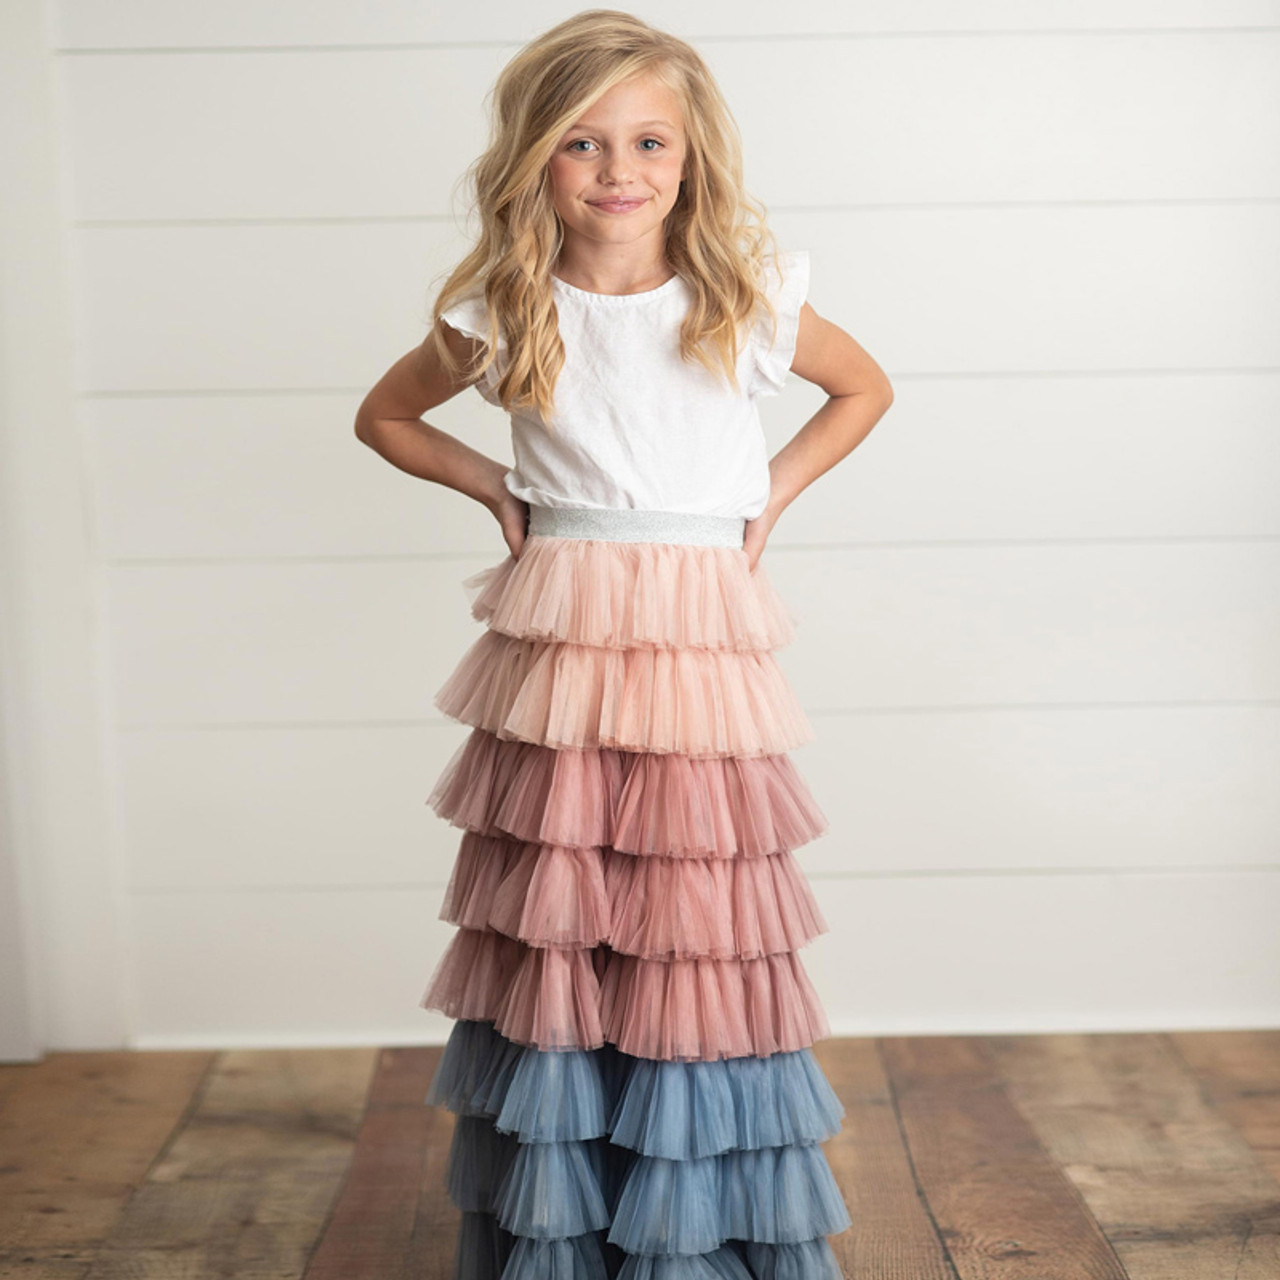 Oopsie Daisy Fancy Party Ombre Tiered Tulle Skirt - Multi - size 7/8